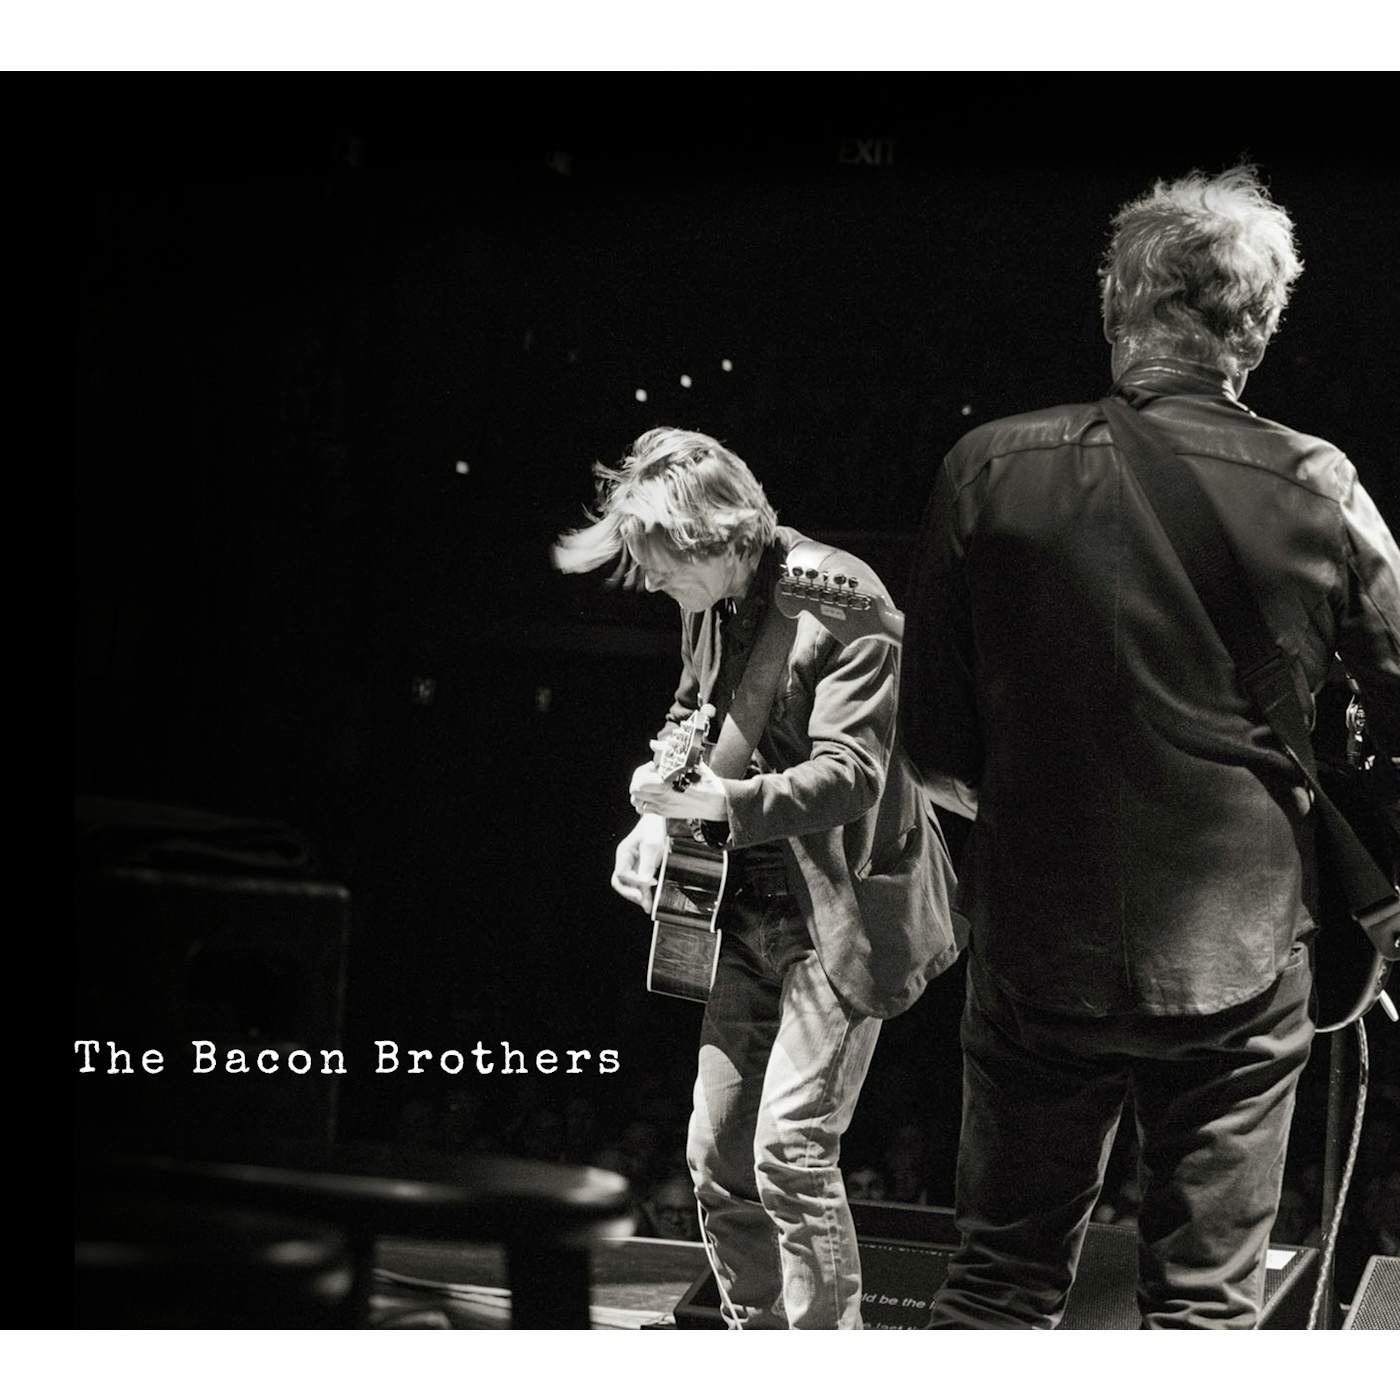 The Bacon Brothers CD